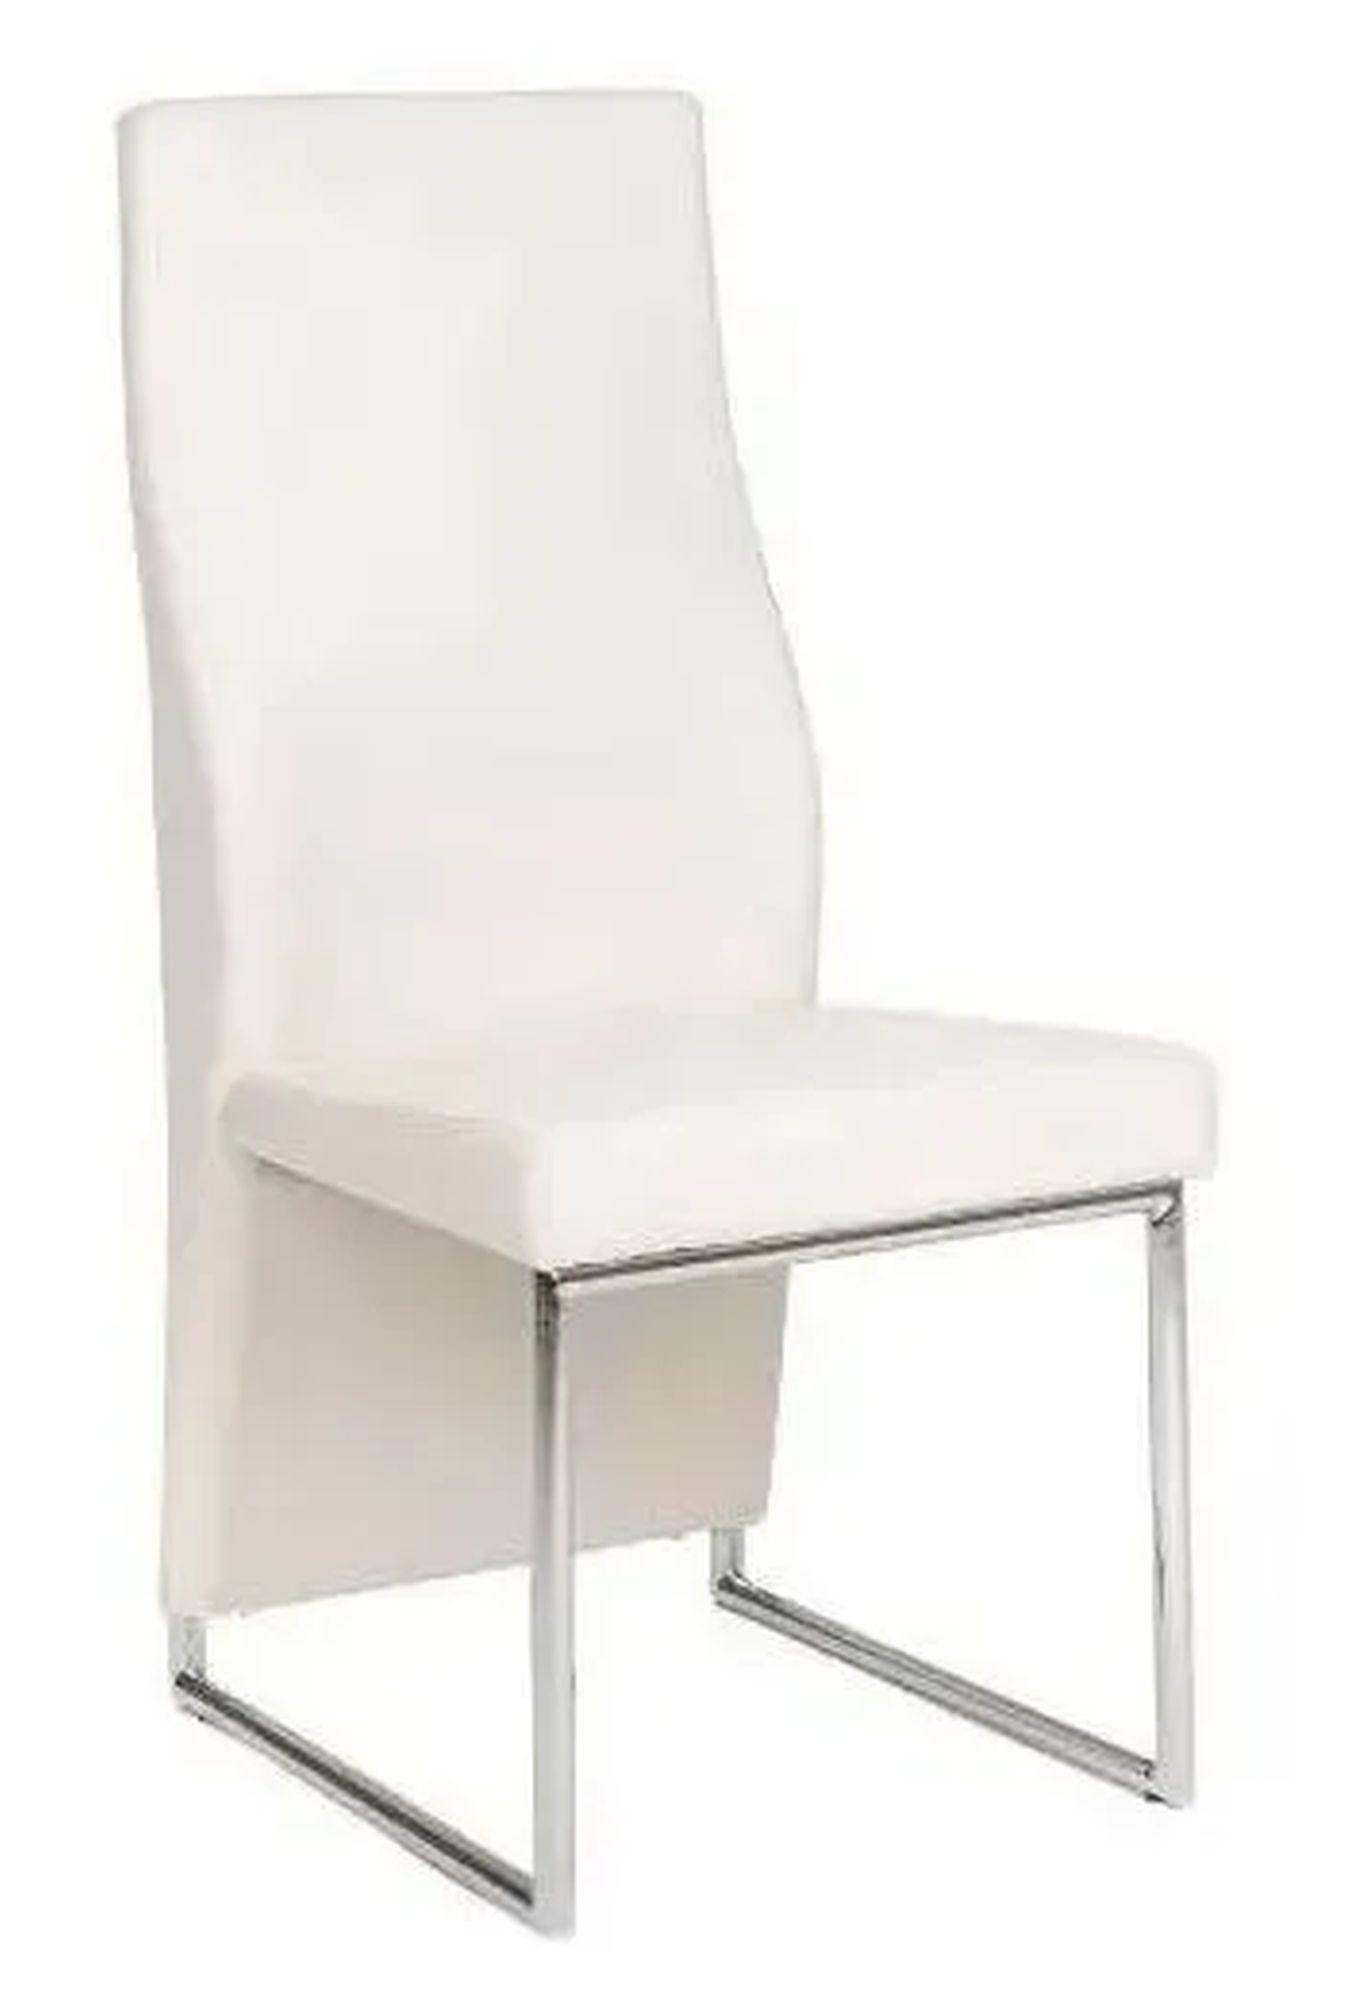 Perth Cream Dining Chair, Leather - Faux PU with High Back and Stainless Steel Chrome Base